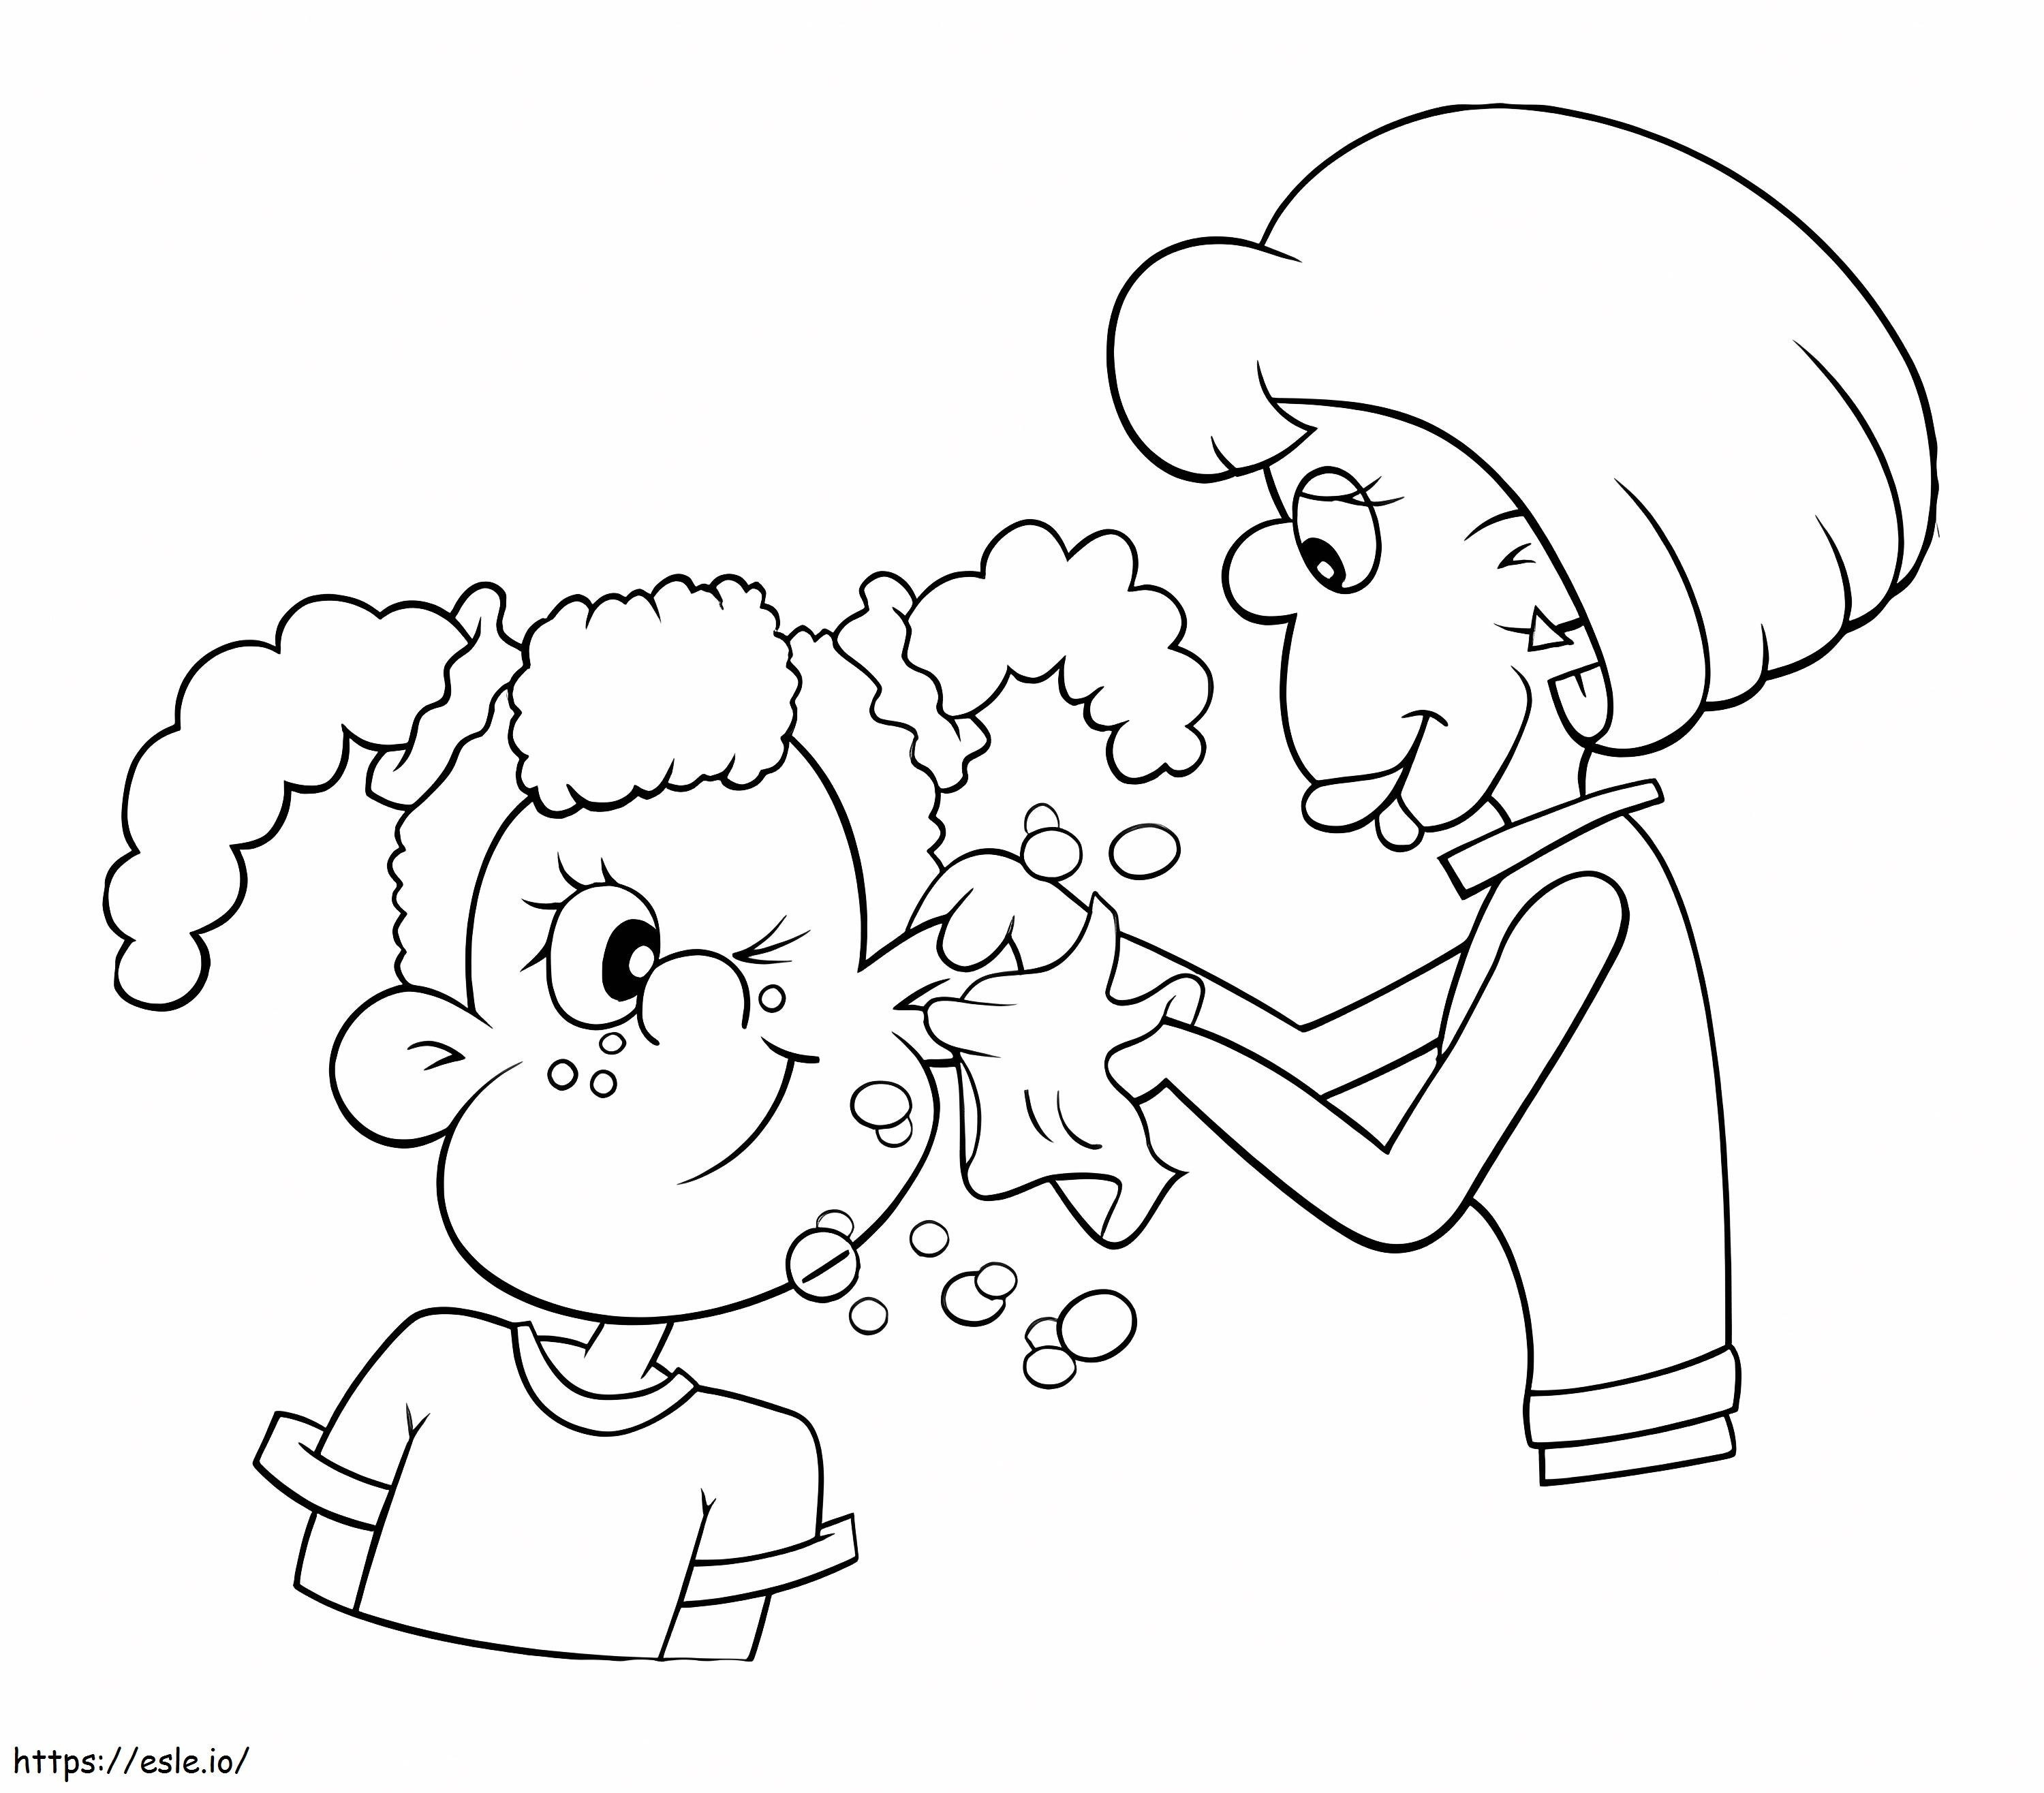 Good Hygiene coloring page